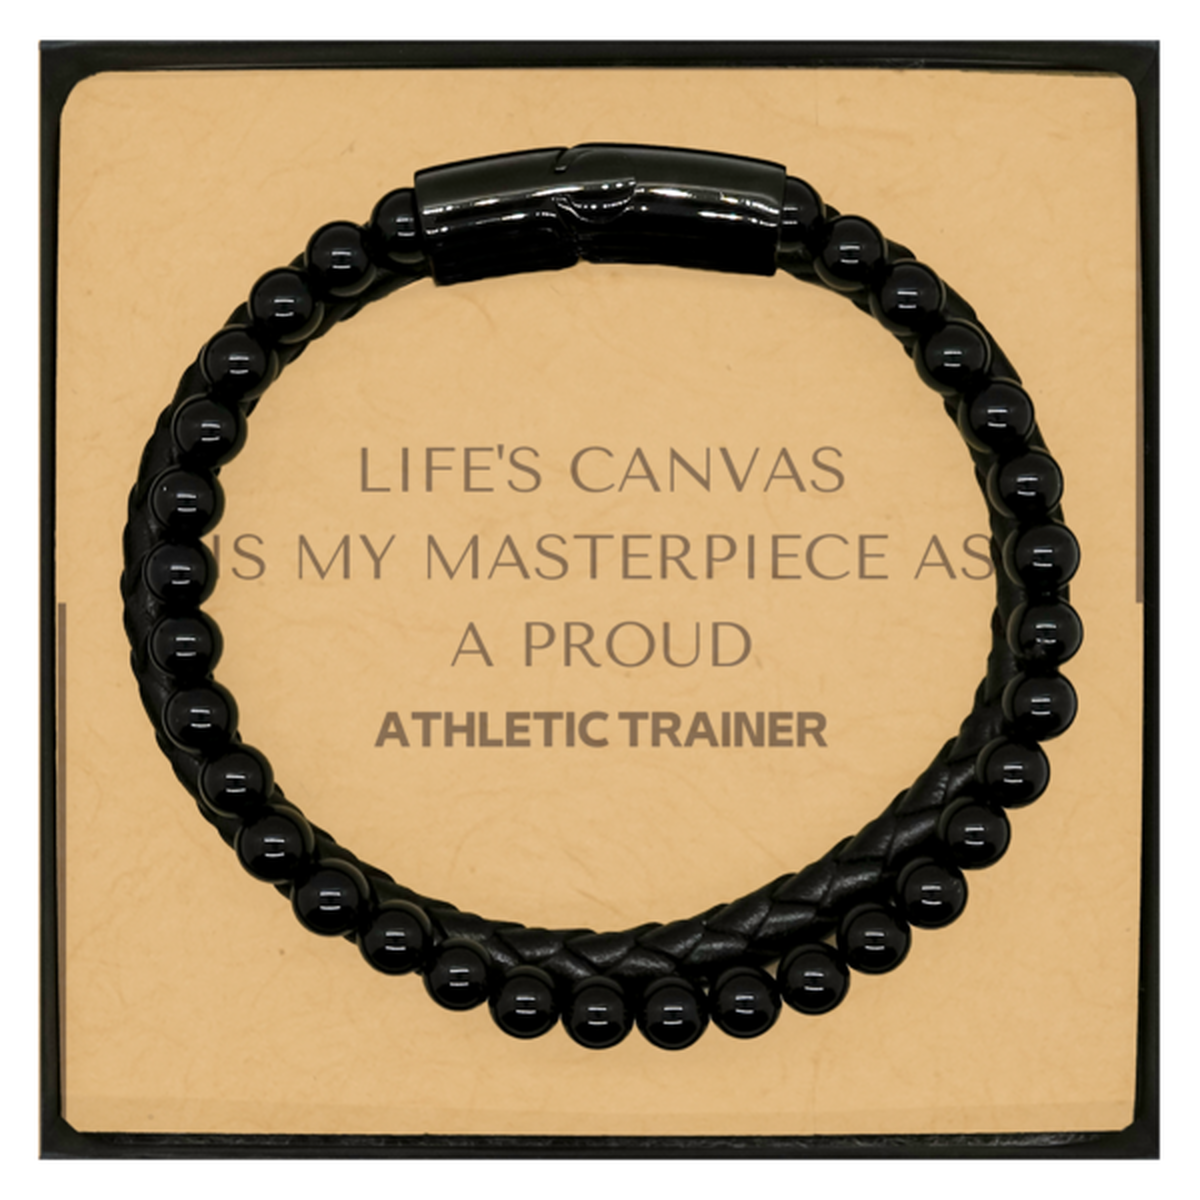 Proud Athletic Trainer Gifts, Life's canvas is my masterpiece, Epic Birthday Christmas Unique Stone Leather Bracelets For Athletic Trainer, Coworkers, Men, Women, Friends